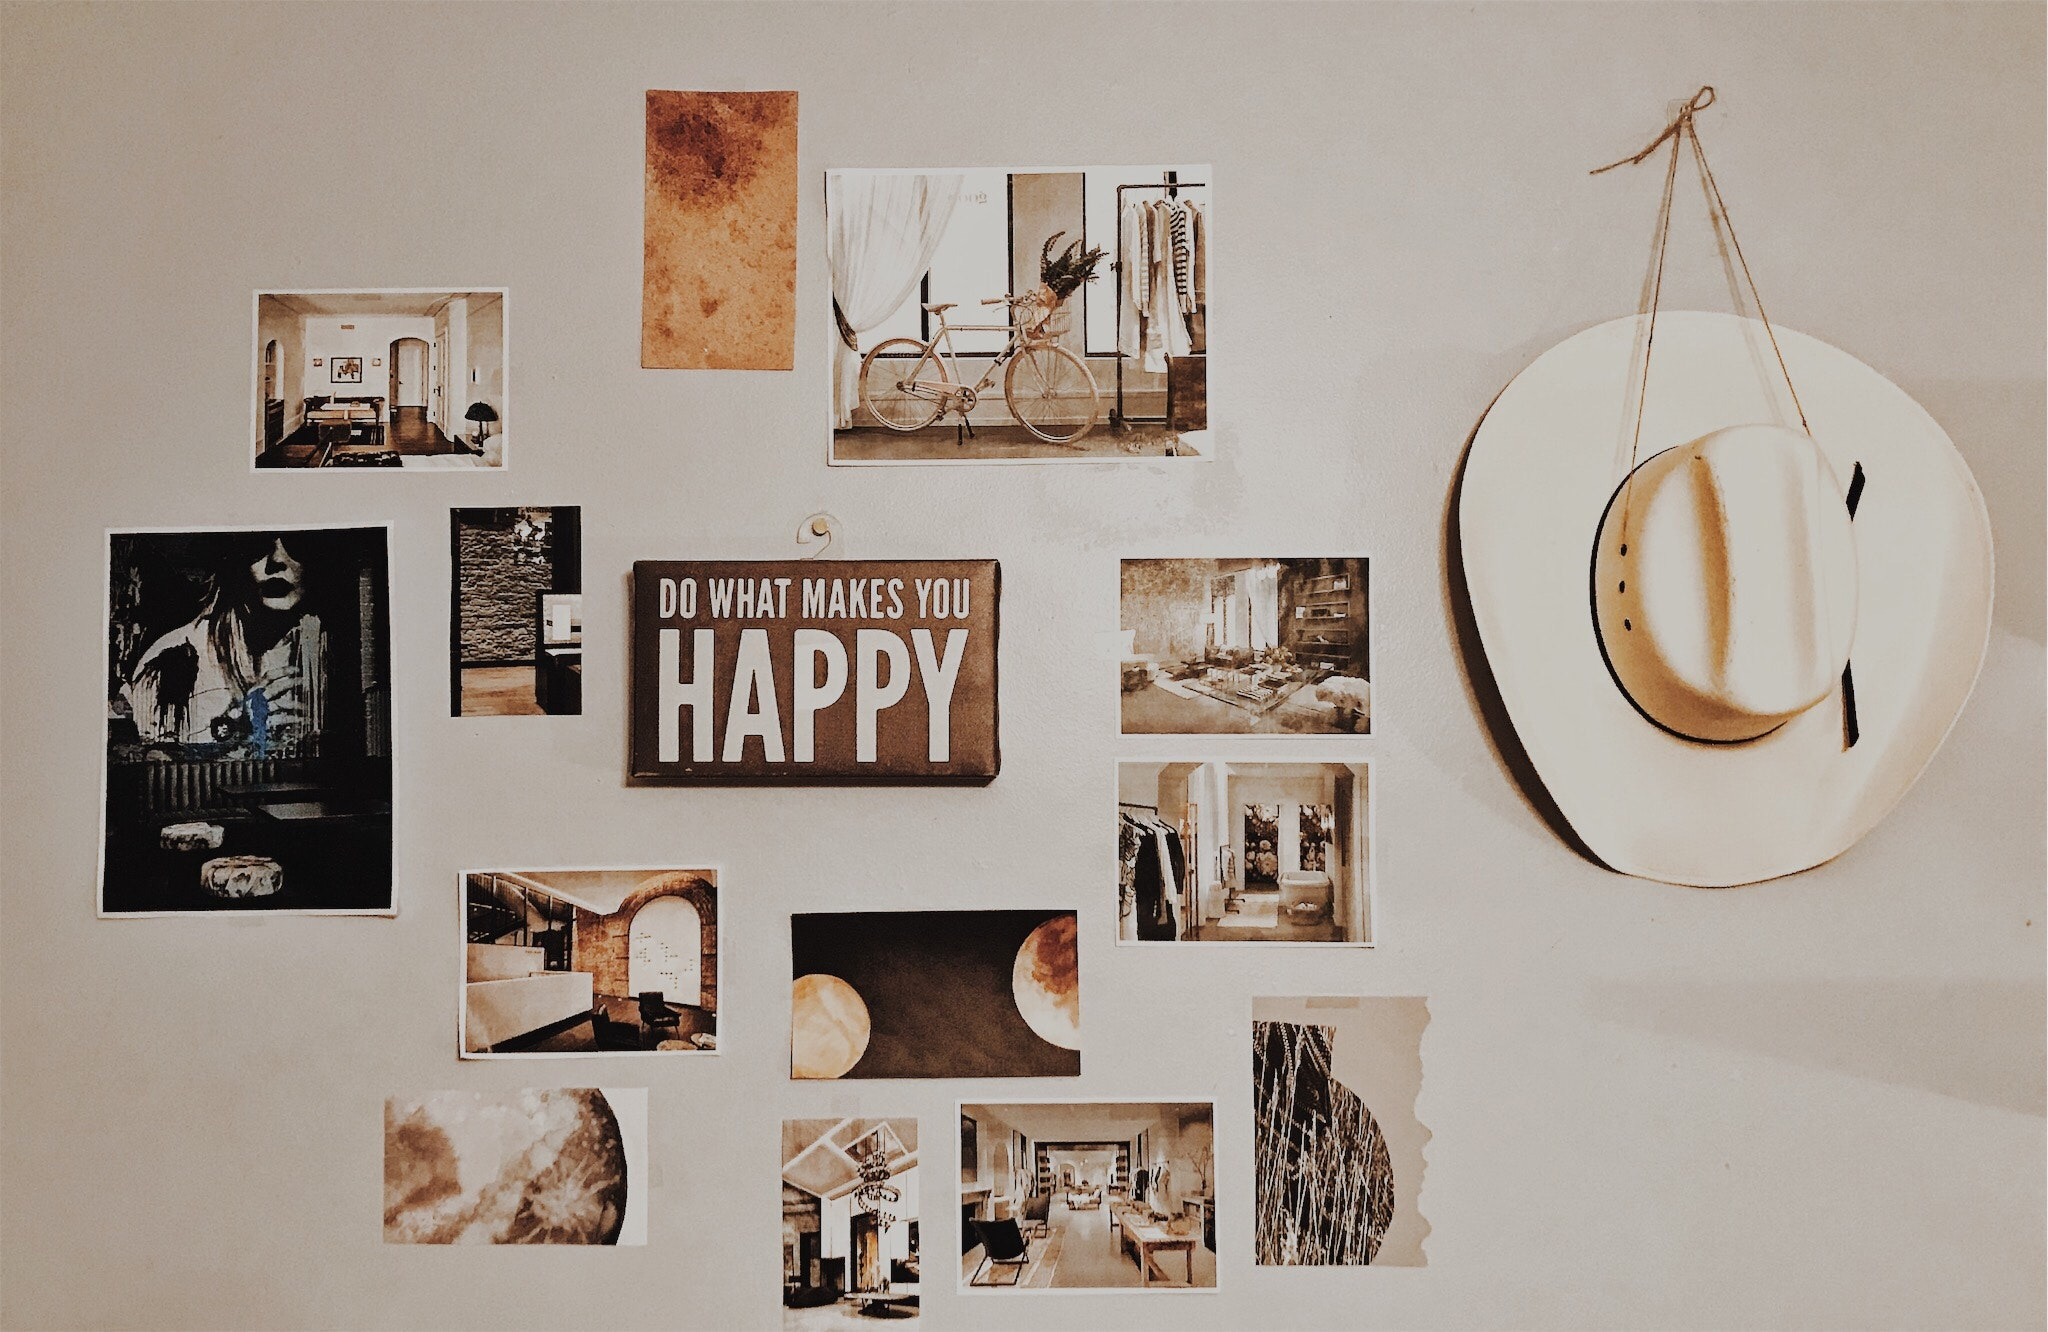 Photo by heather bozman: https://www.pexels.com/photo/photo-of-brown-and-white-photo-frames-hang-in-wall-1058770/